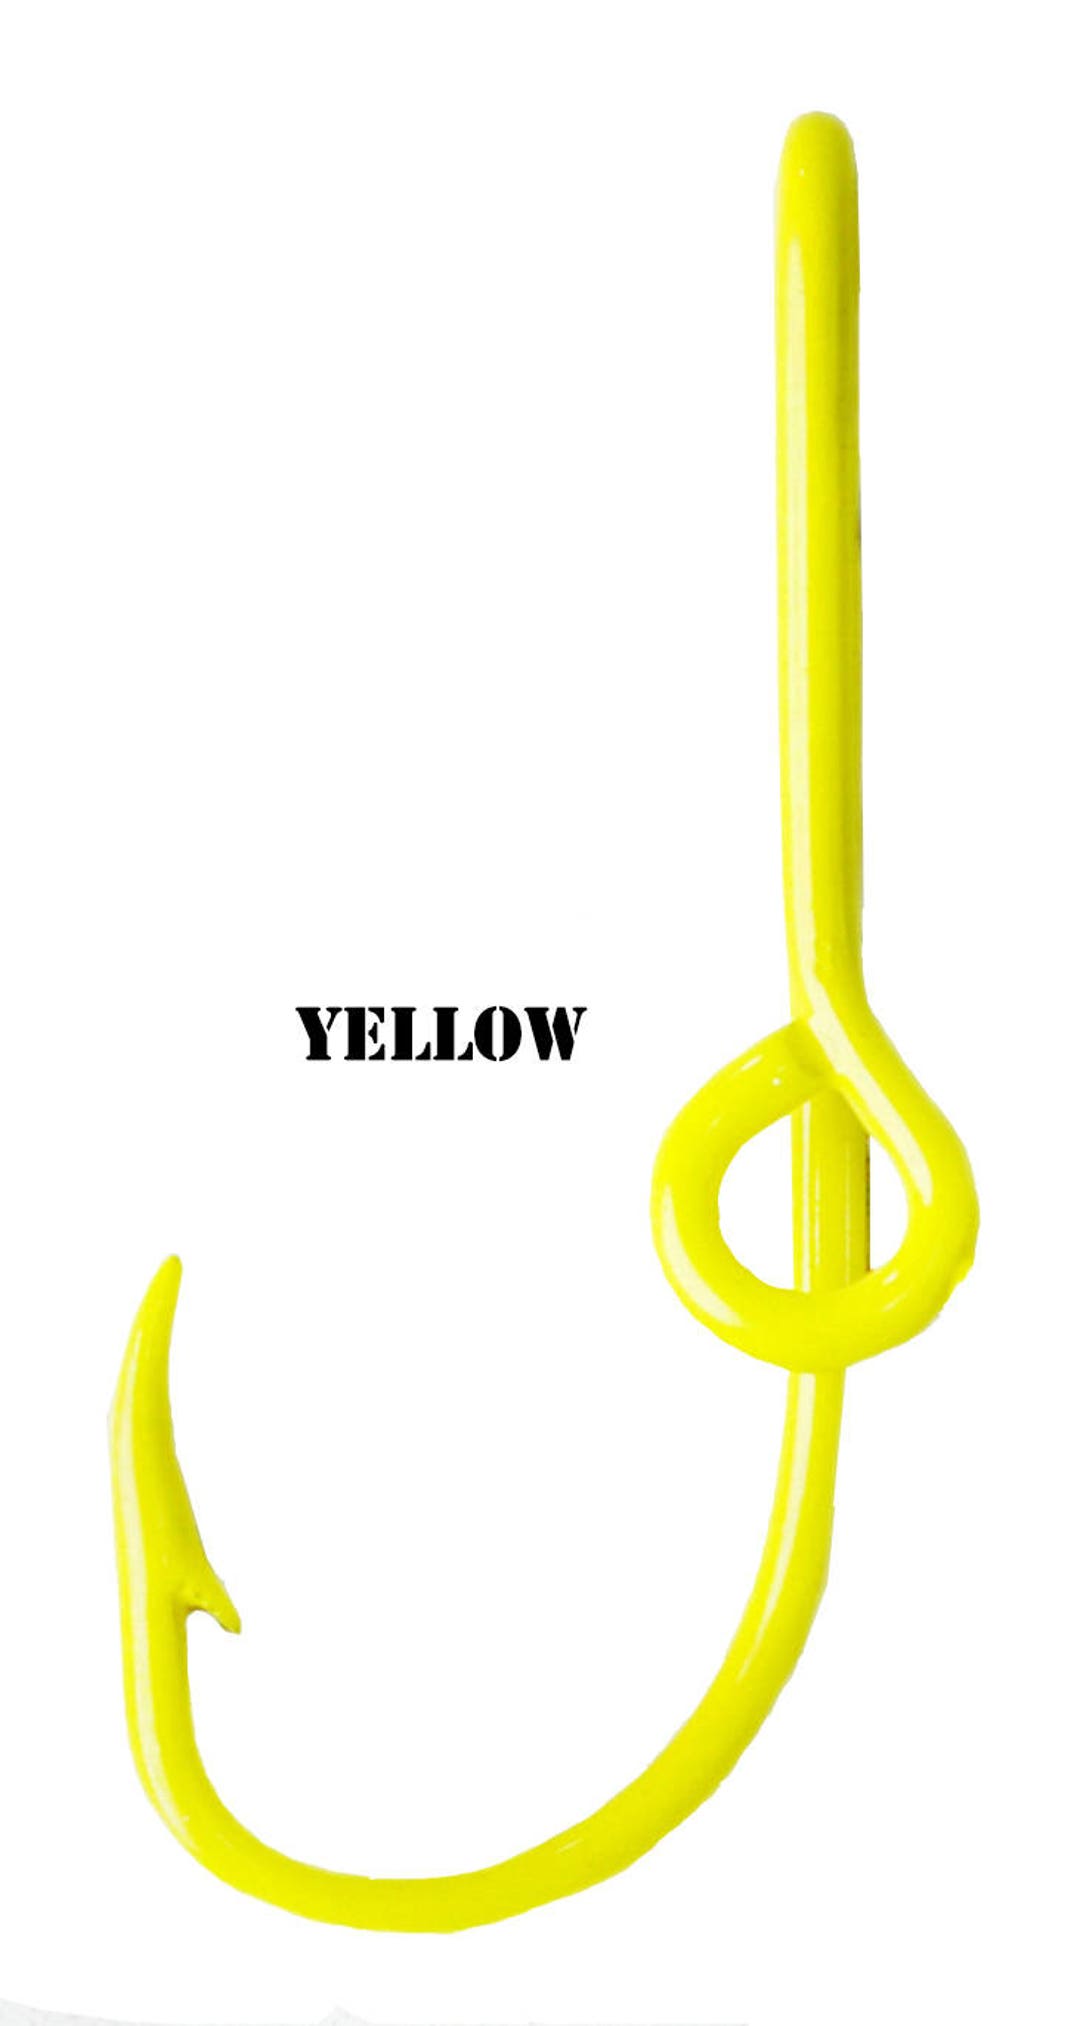 Yellow Powder Coated Fish Hook for Hat Brim or Bill Yellow Fish Hook Tie  Clasp Hat Clip for Hat or Cap Money Clip 